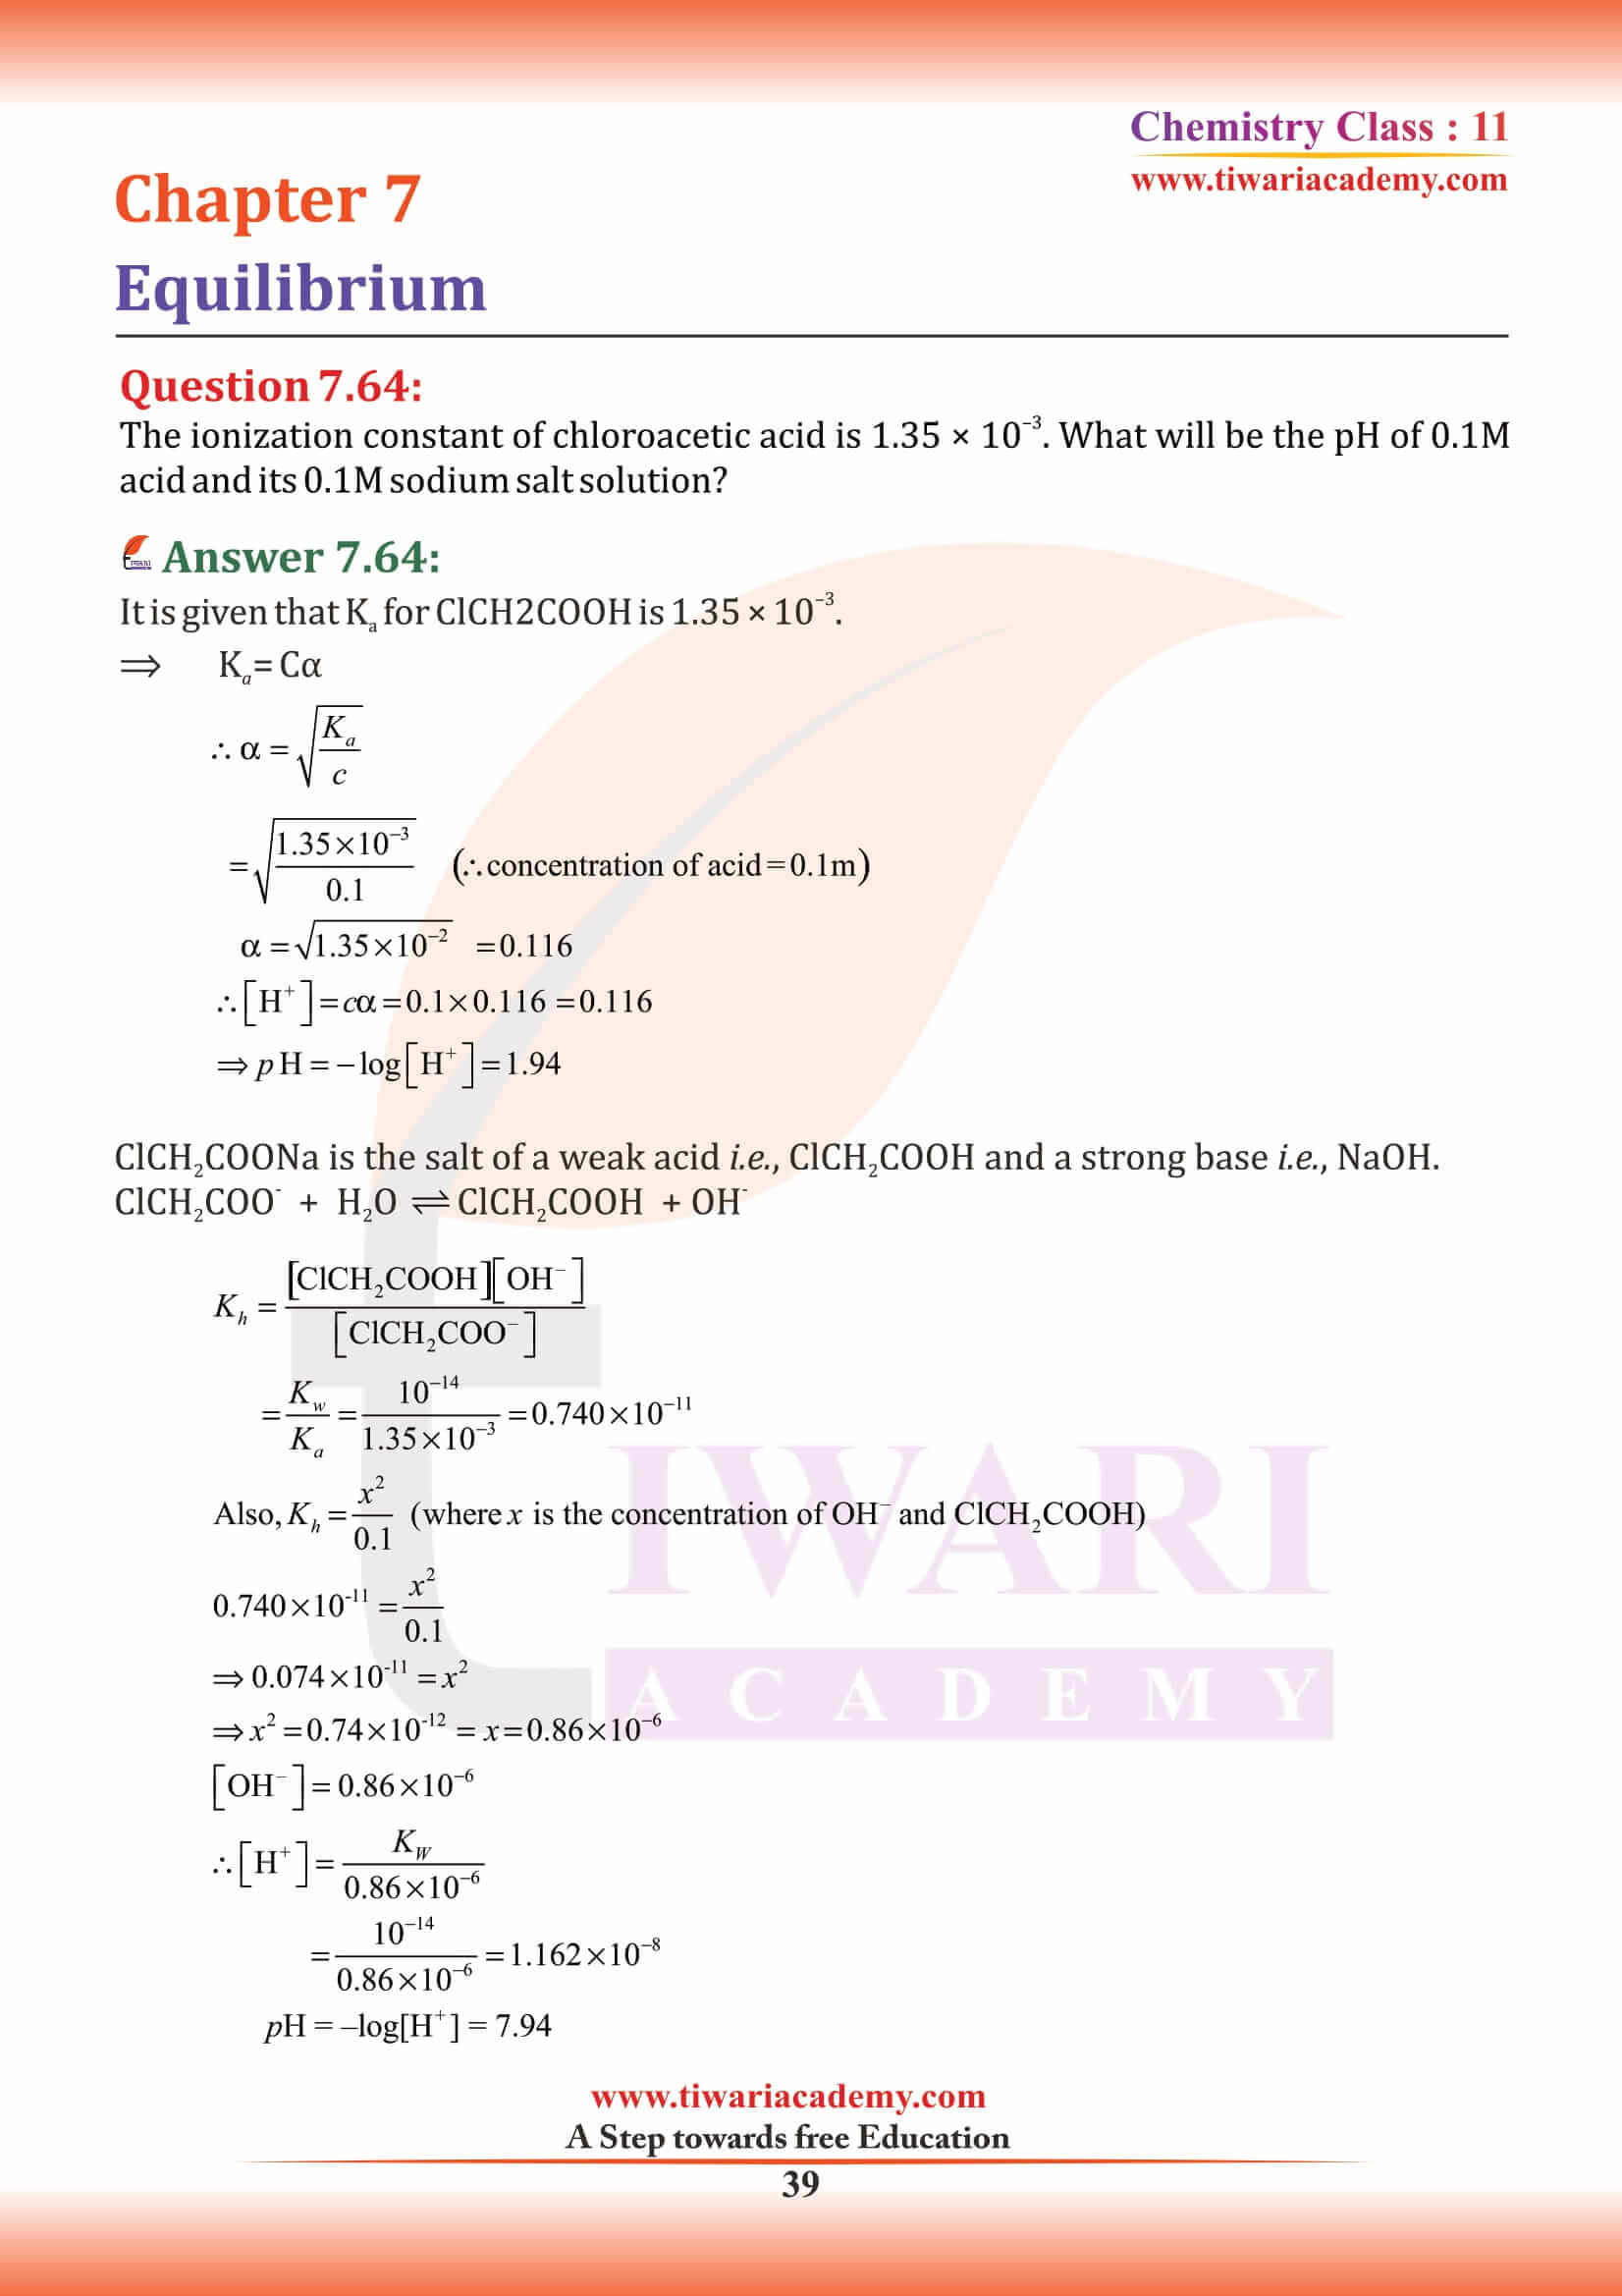 11th Chemistry Chapter 7 sols in PDF